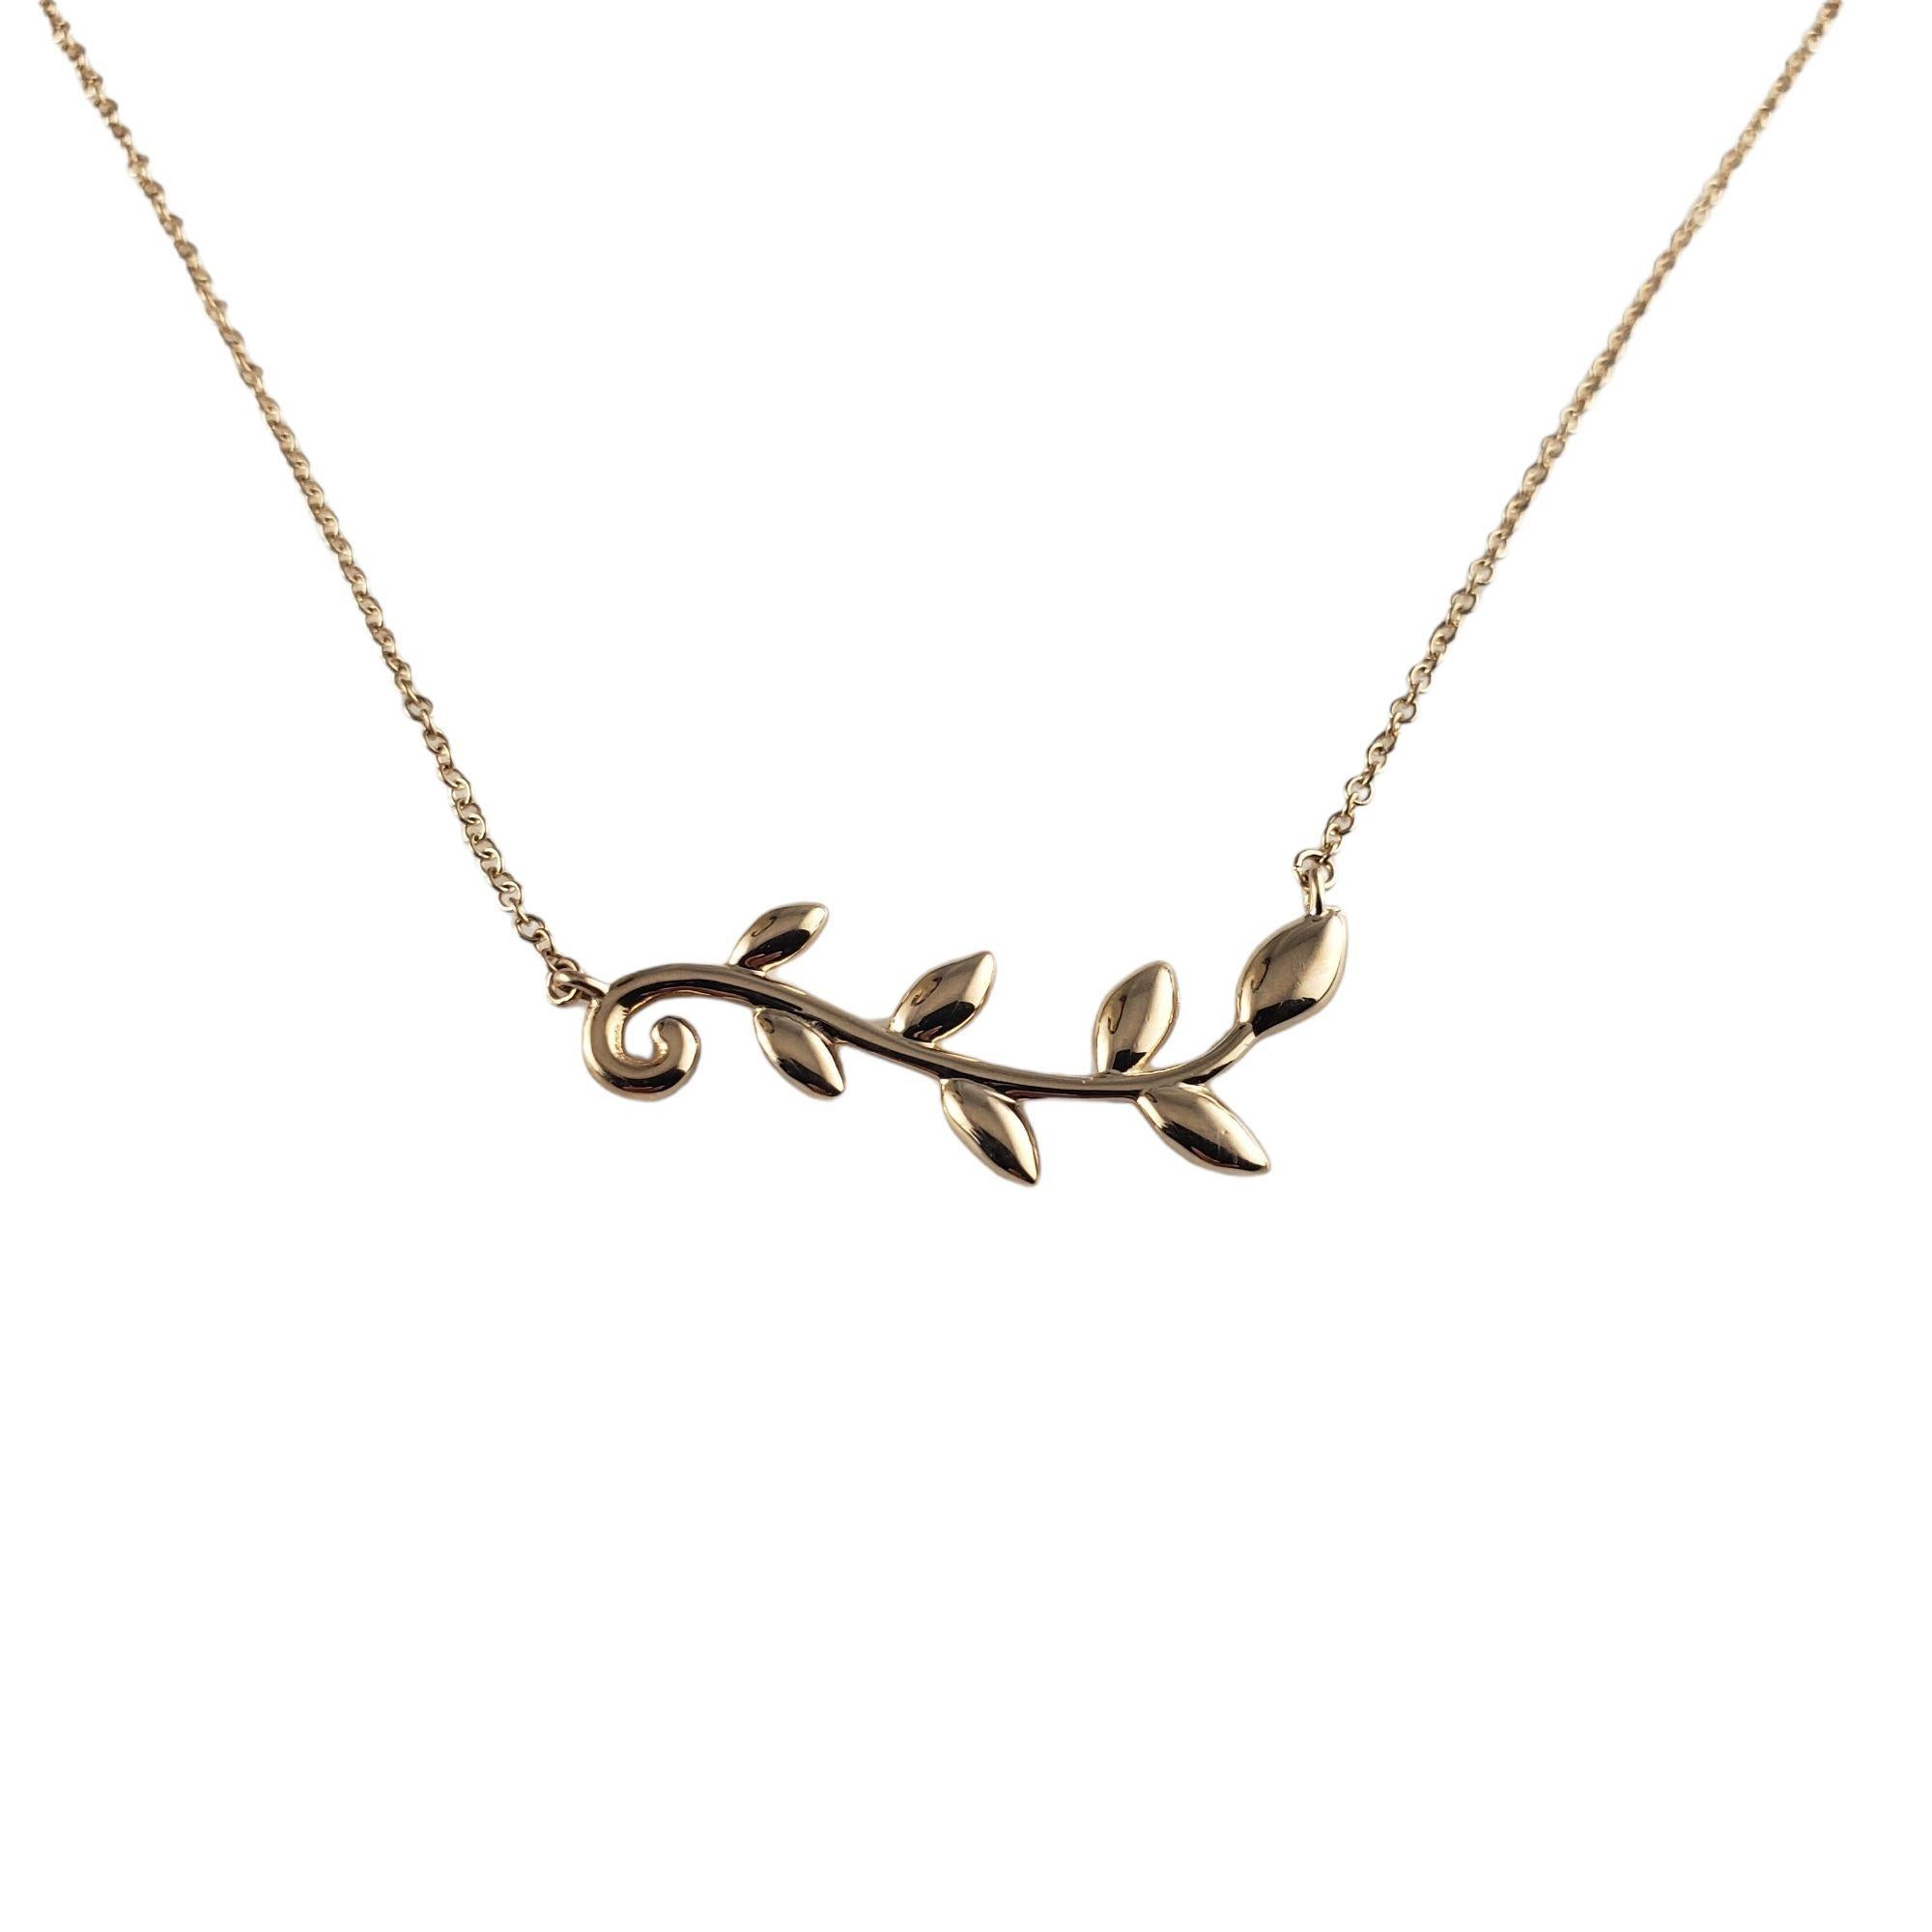 Tiffany & Co. Paloma Picasso 18 Karat Yellow Gold Olive Leaf Vine Pendant Necklace-

This elegant olive leaf vine pendant necklace is crafted in beautifully detailed 18K yellow gold by Paloma Picasso for Tiffany & Co.

Size: 18 inches (necklace)
28